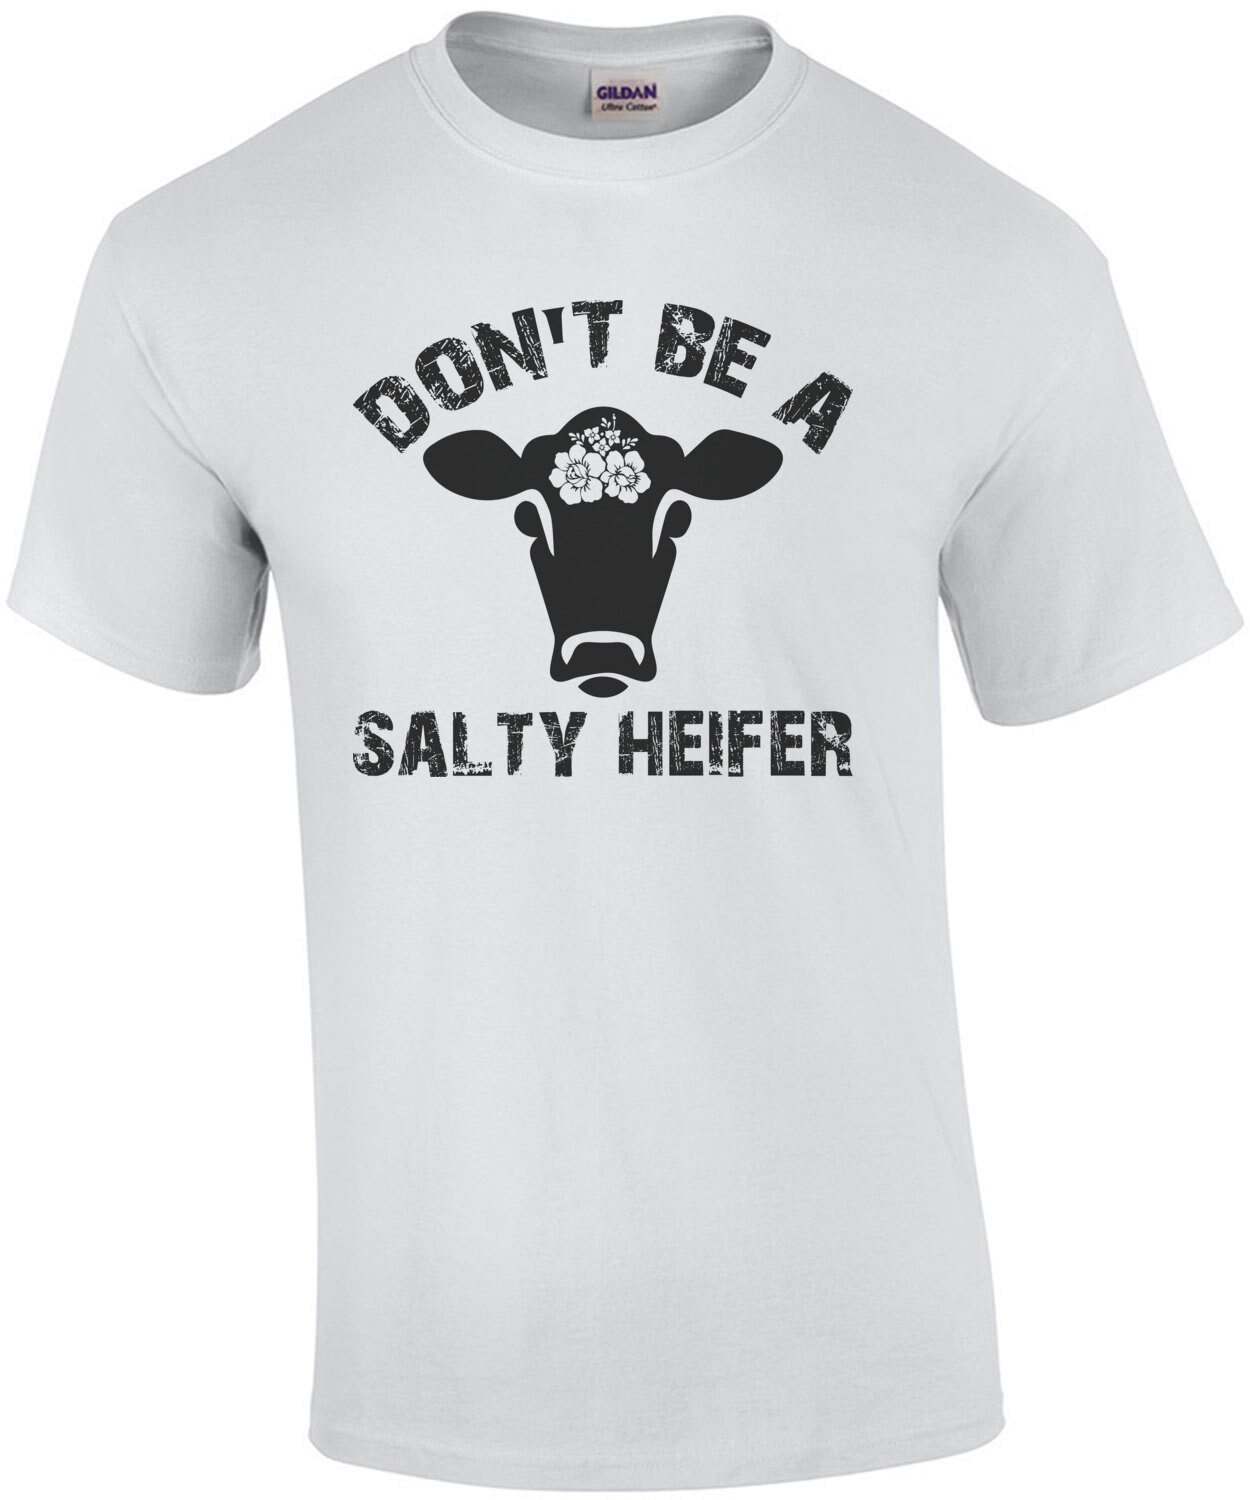 Don't Be a Salty Heifer Funny Shirt